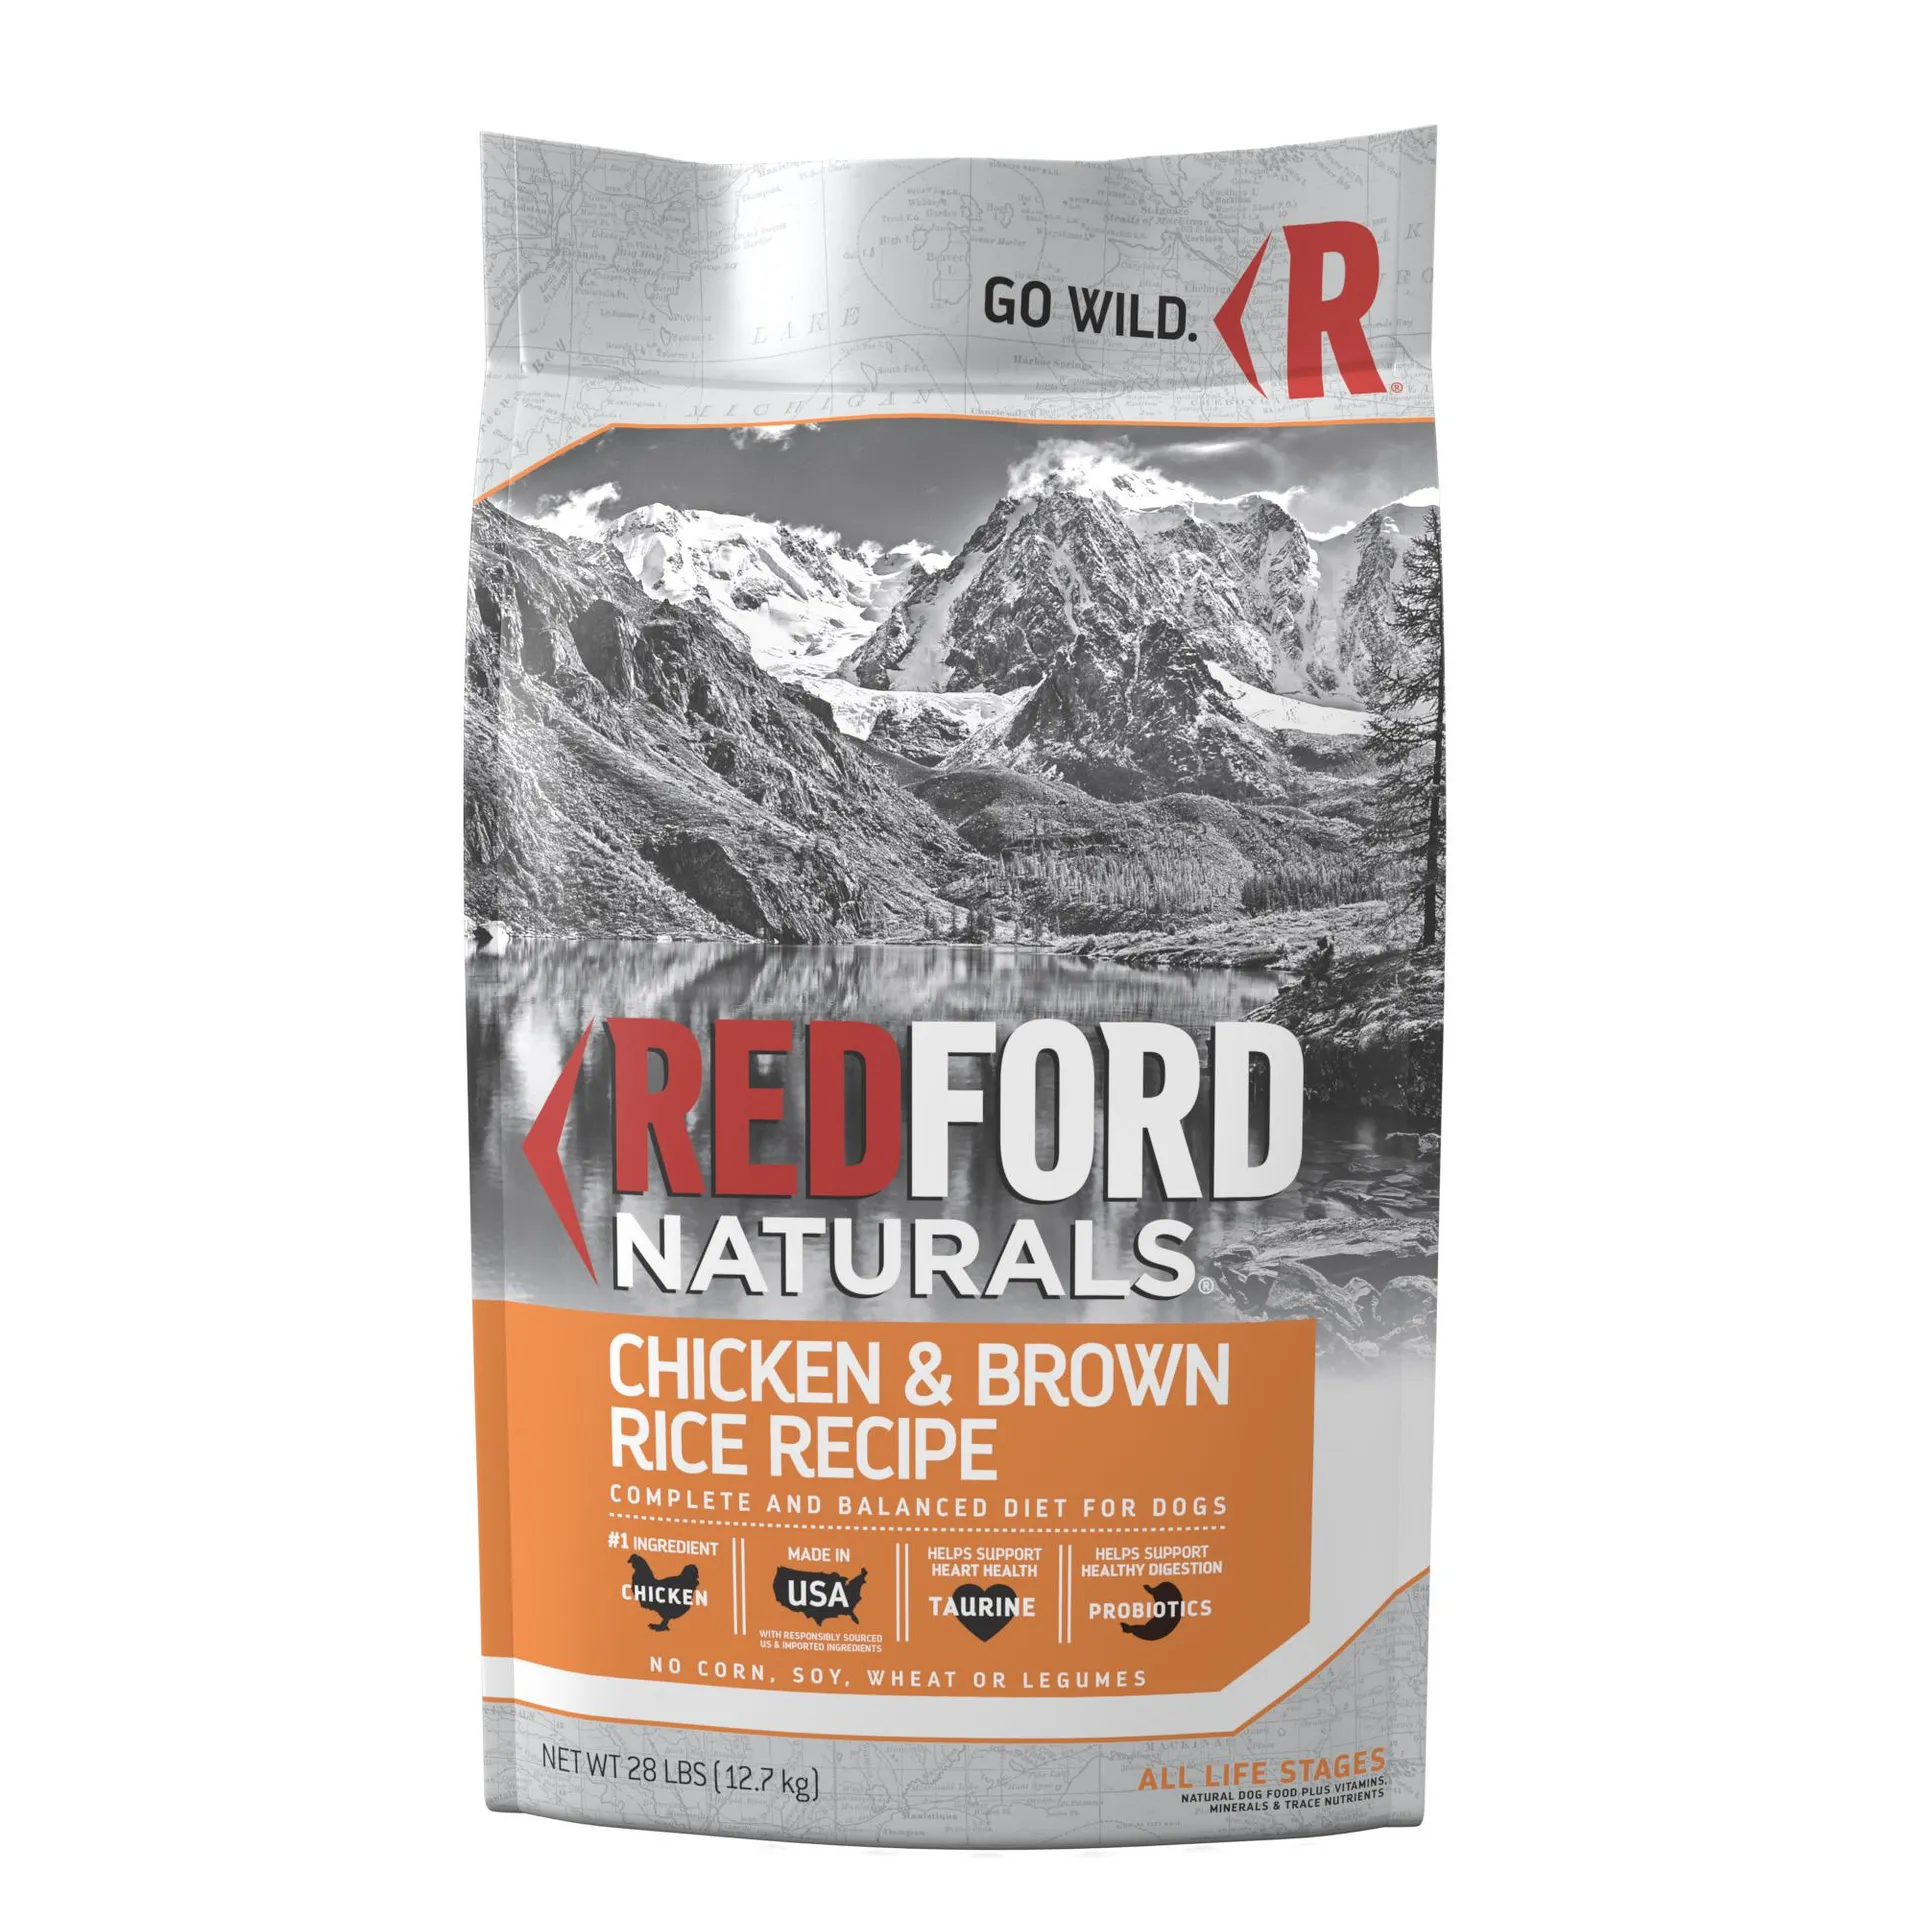 Redford Naturals Chicken & Brown Rice Recipe Dog Food, 28 Pounds